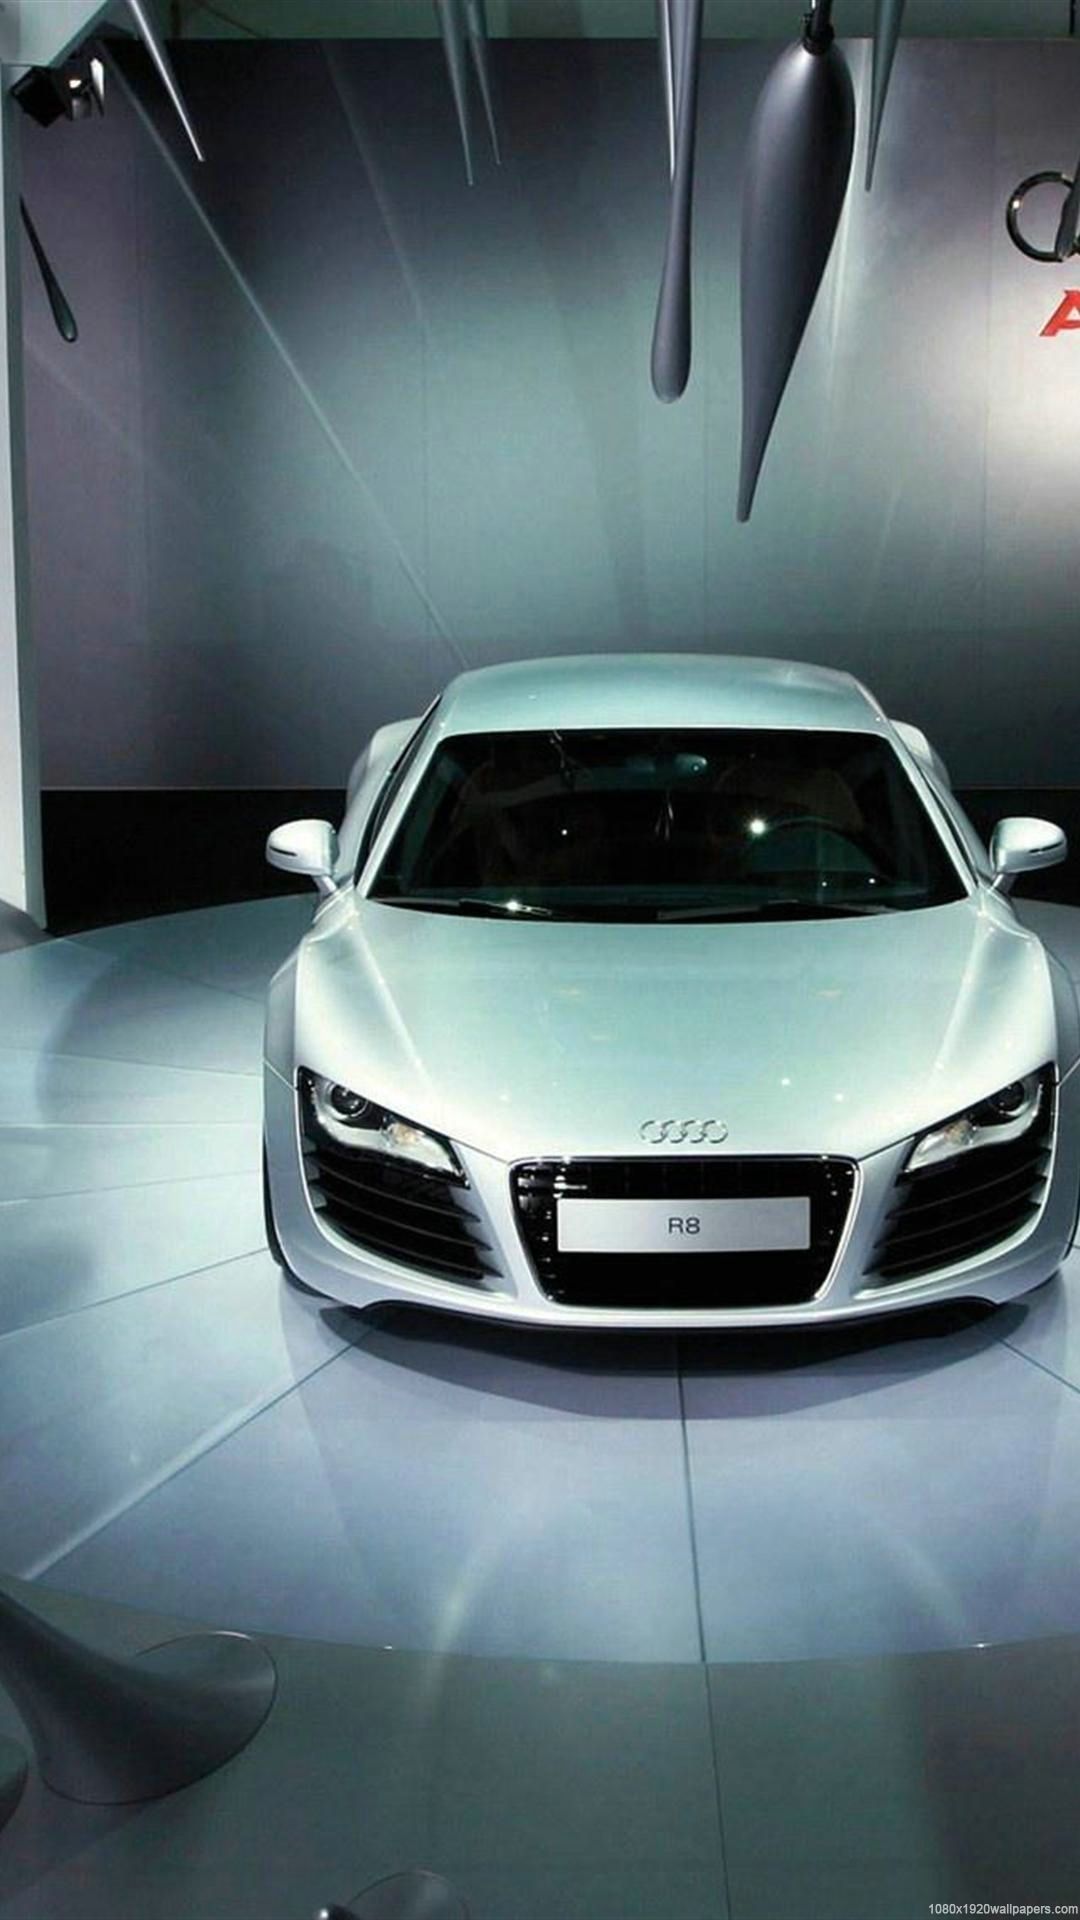 Download Hd Wallpapers Of Audi Cars